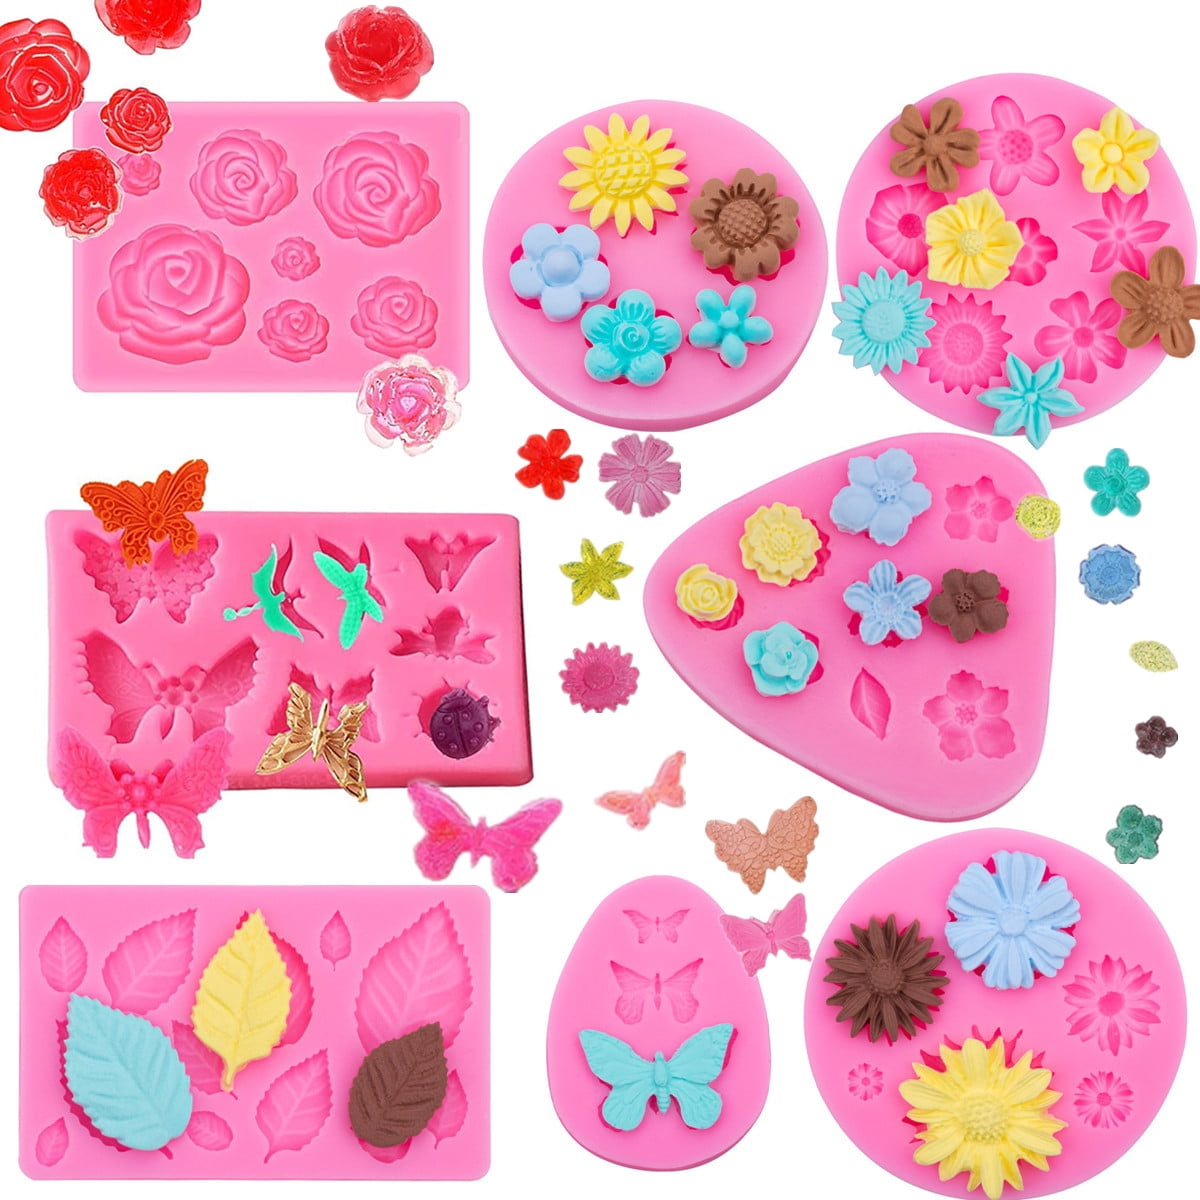 Clear silicone jewelry mold flowers for art craft 6pc. P-93 